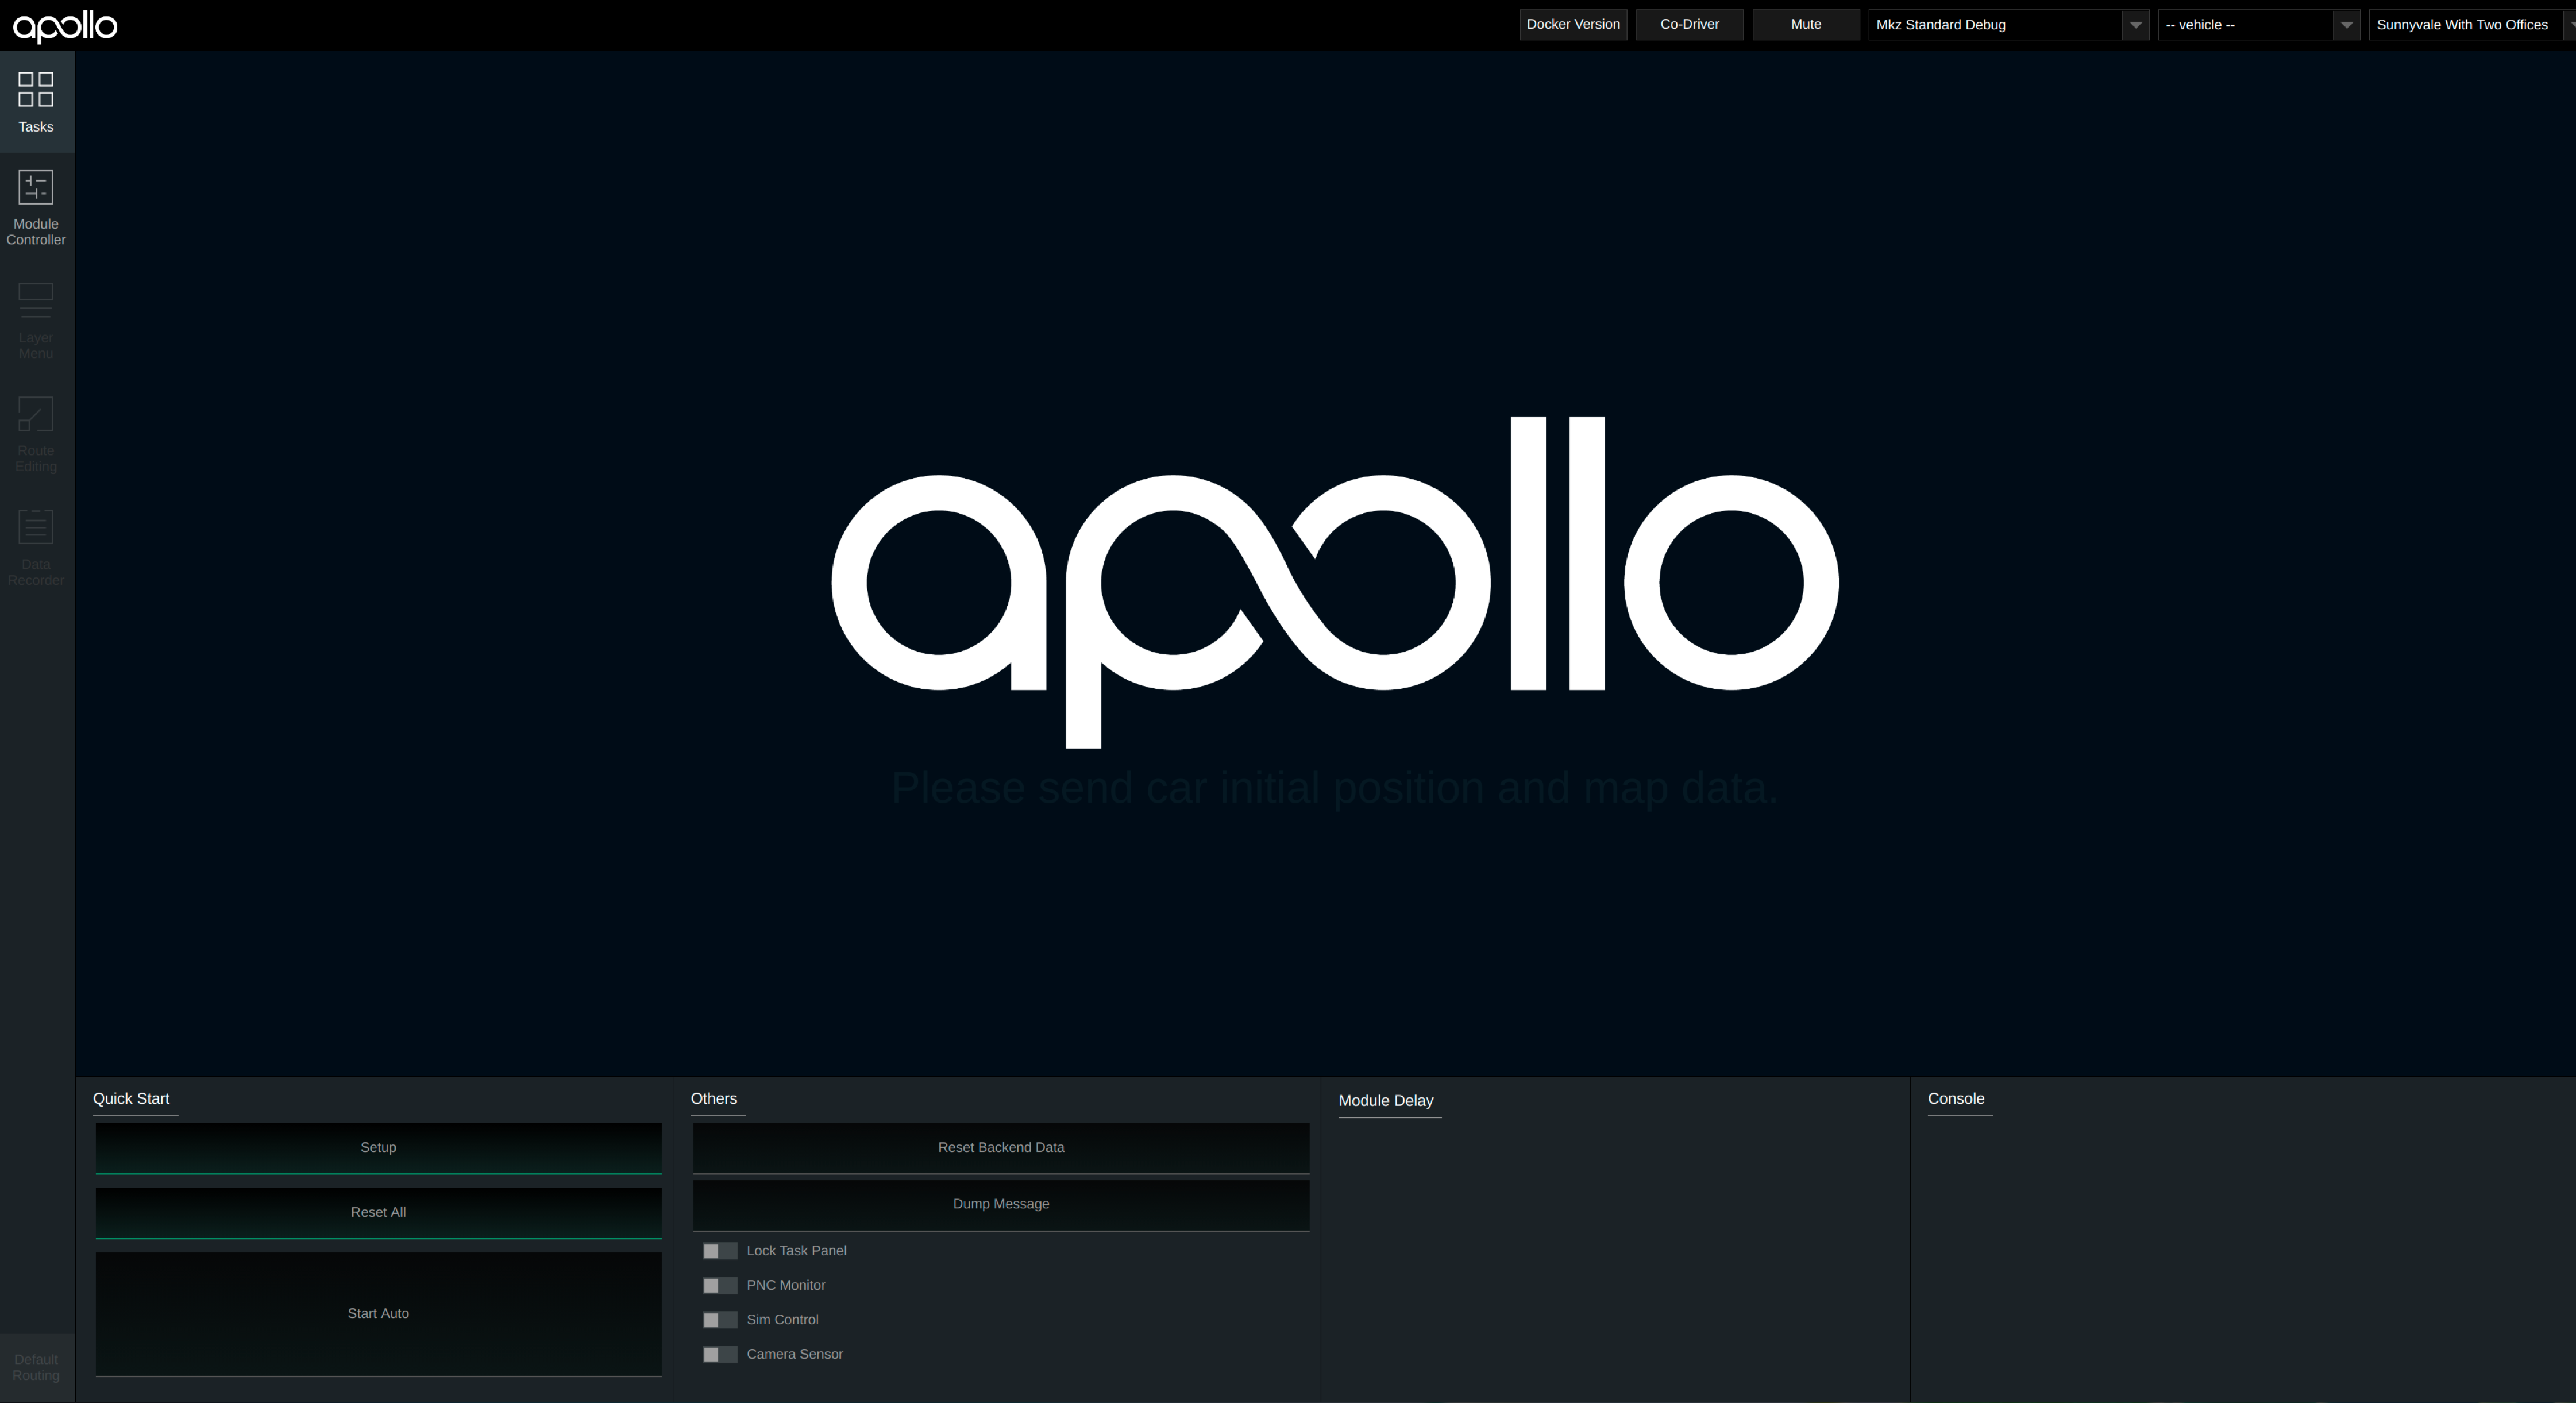 docs/howto/images/apollo_bootstrap_screen.png